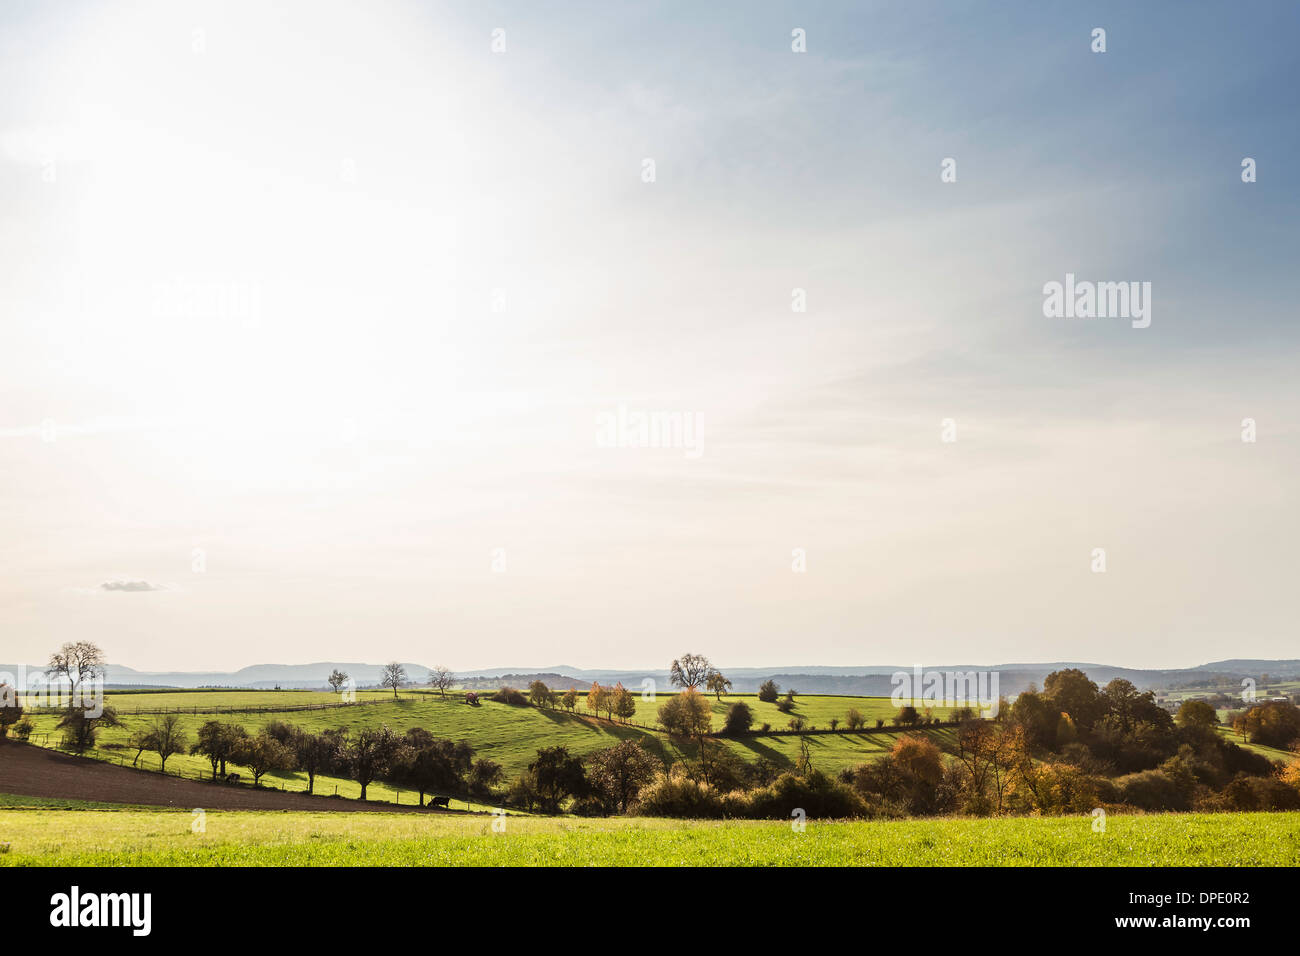 Idyllic agricultural landscape in autumn Stock Photo